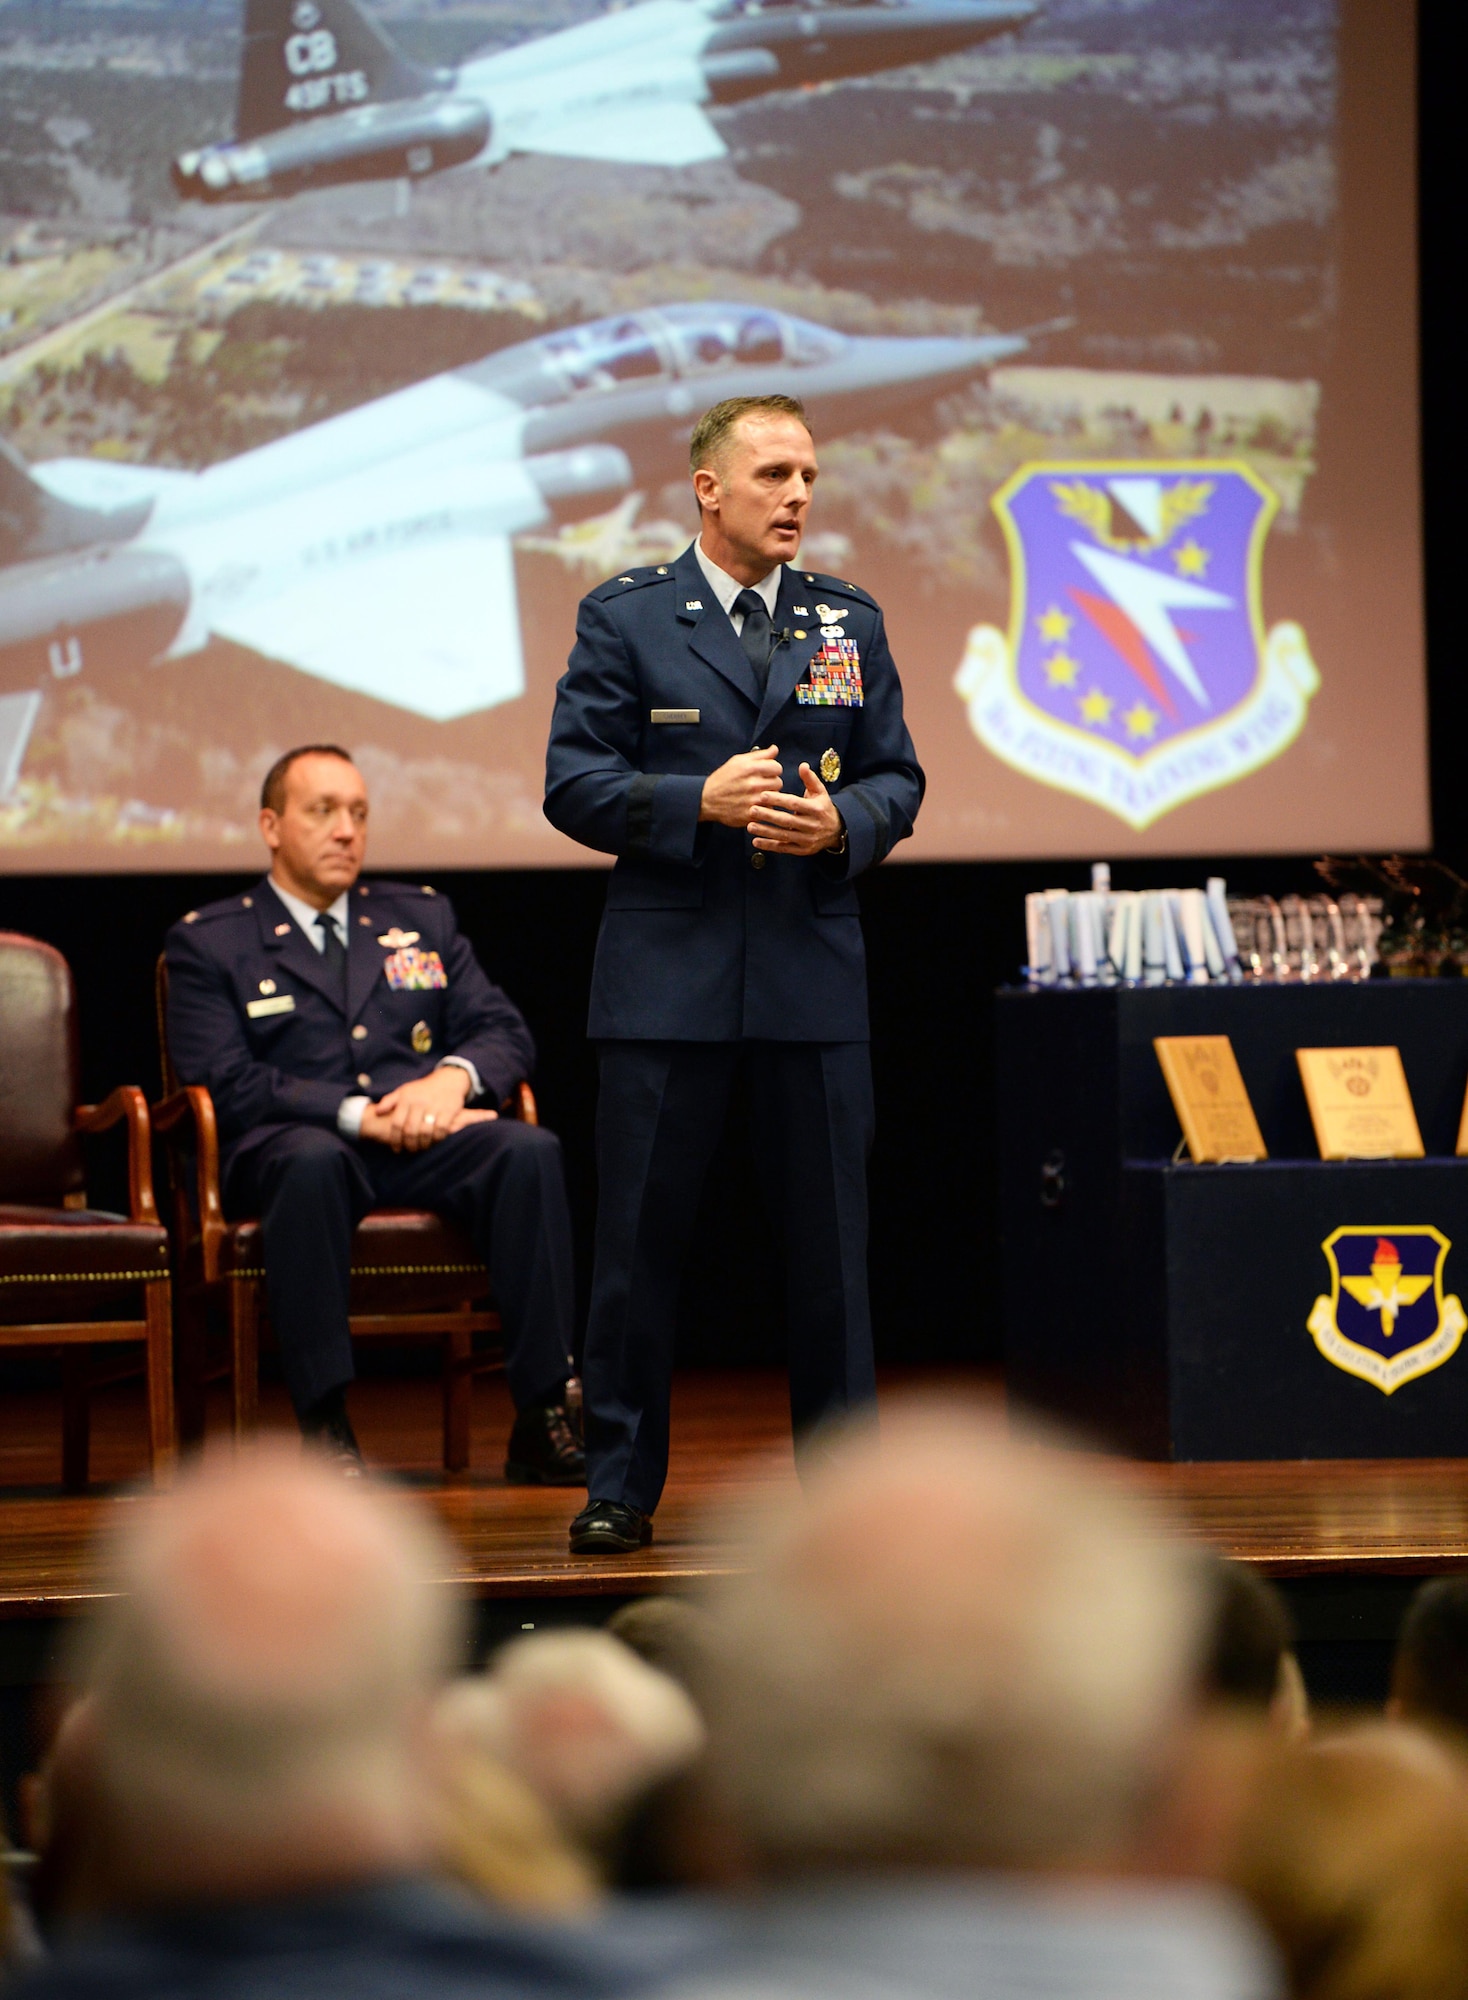 Retired Brig. Gen. John Cherrey, former Director of Intelligence, Operations and Nuclear Integration, Headquarters Air Education and Training Command at Joint Base San Antonio-Randolph, Texas, speaks to attendees during Specialized Undergraduate Pilot Training Class’s 19-17/18 graduation in the Kaye Auditorium June 28, 2019, on Columbus Air Force Base, Miss. Cherrey spoke about his last 30 years as a pilot and wanted the newest generation of aviators to understand how important their job is. (U.S. Air Force photo by Airman Hannah Bean)